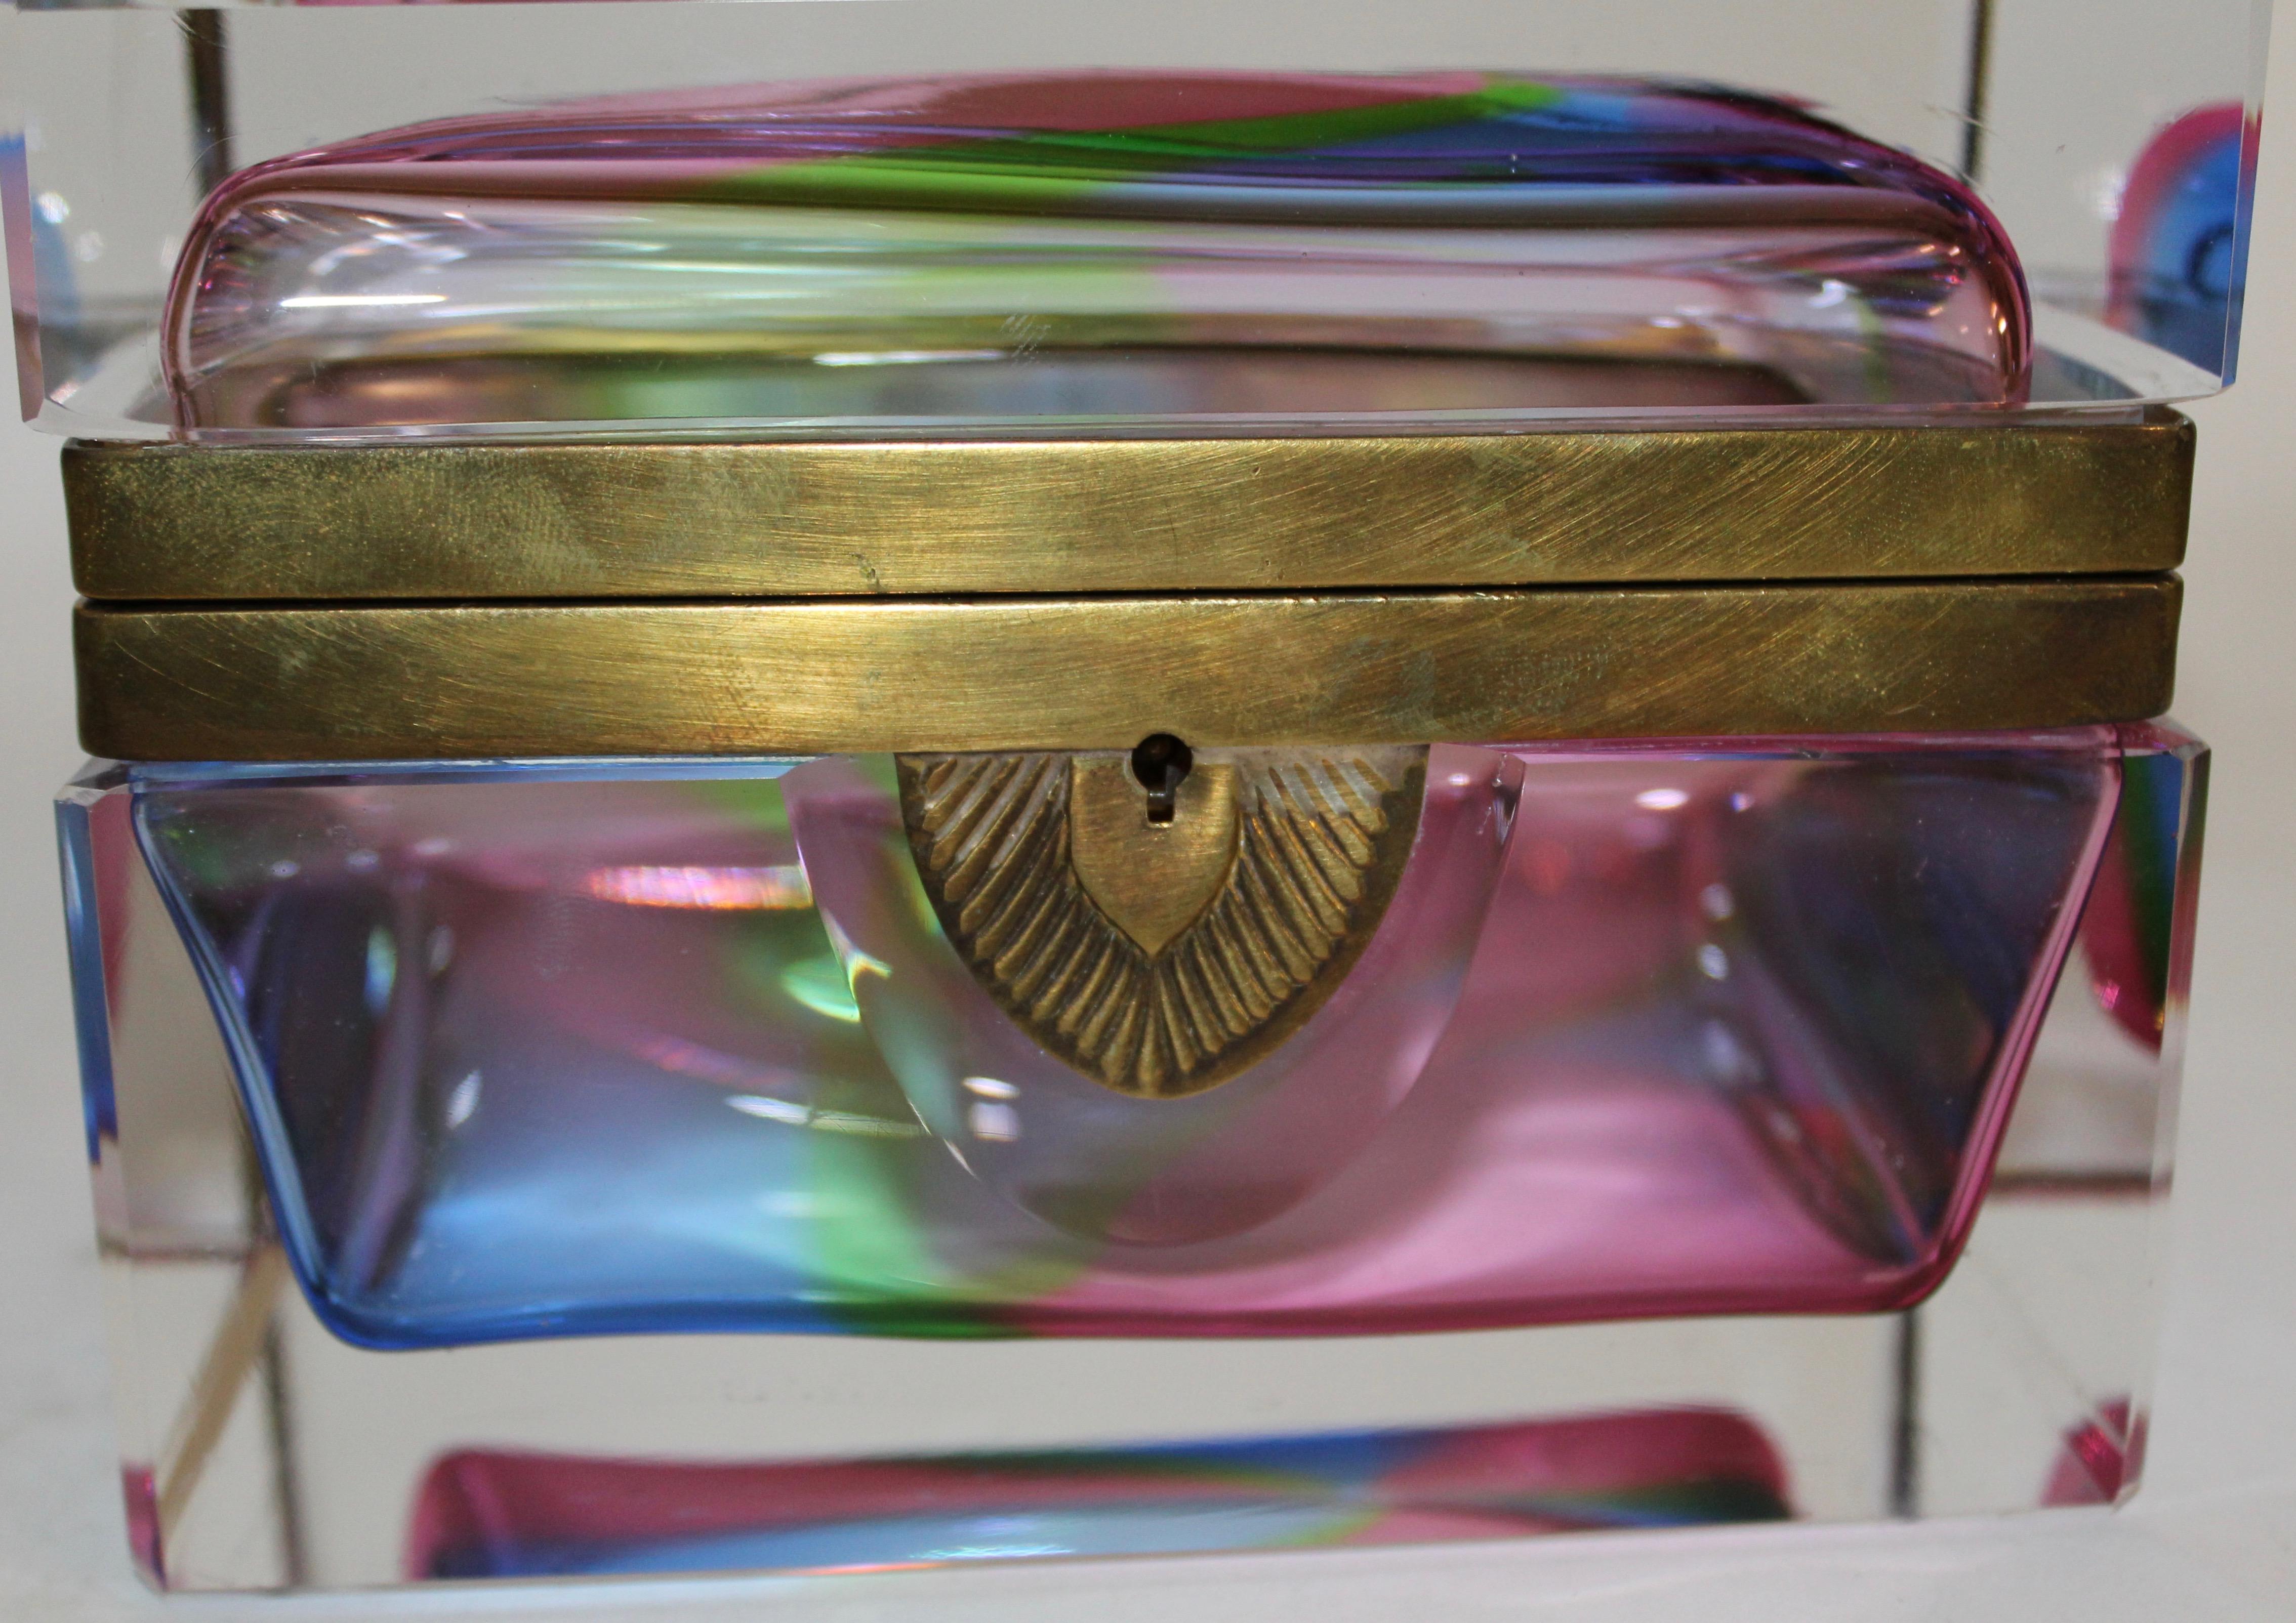 An Italian 1960s Murano glass polychromatic glass box. The thick glass with an eye-catching display of colors ranging from pinks, blues and greens creating a rainbow effect, encased in a layer of clear glass. Finished with a gilt mount and keyhole,